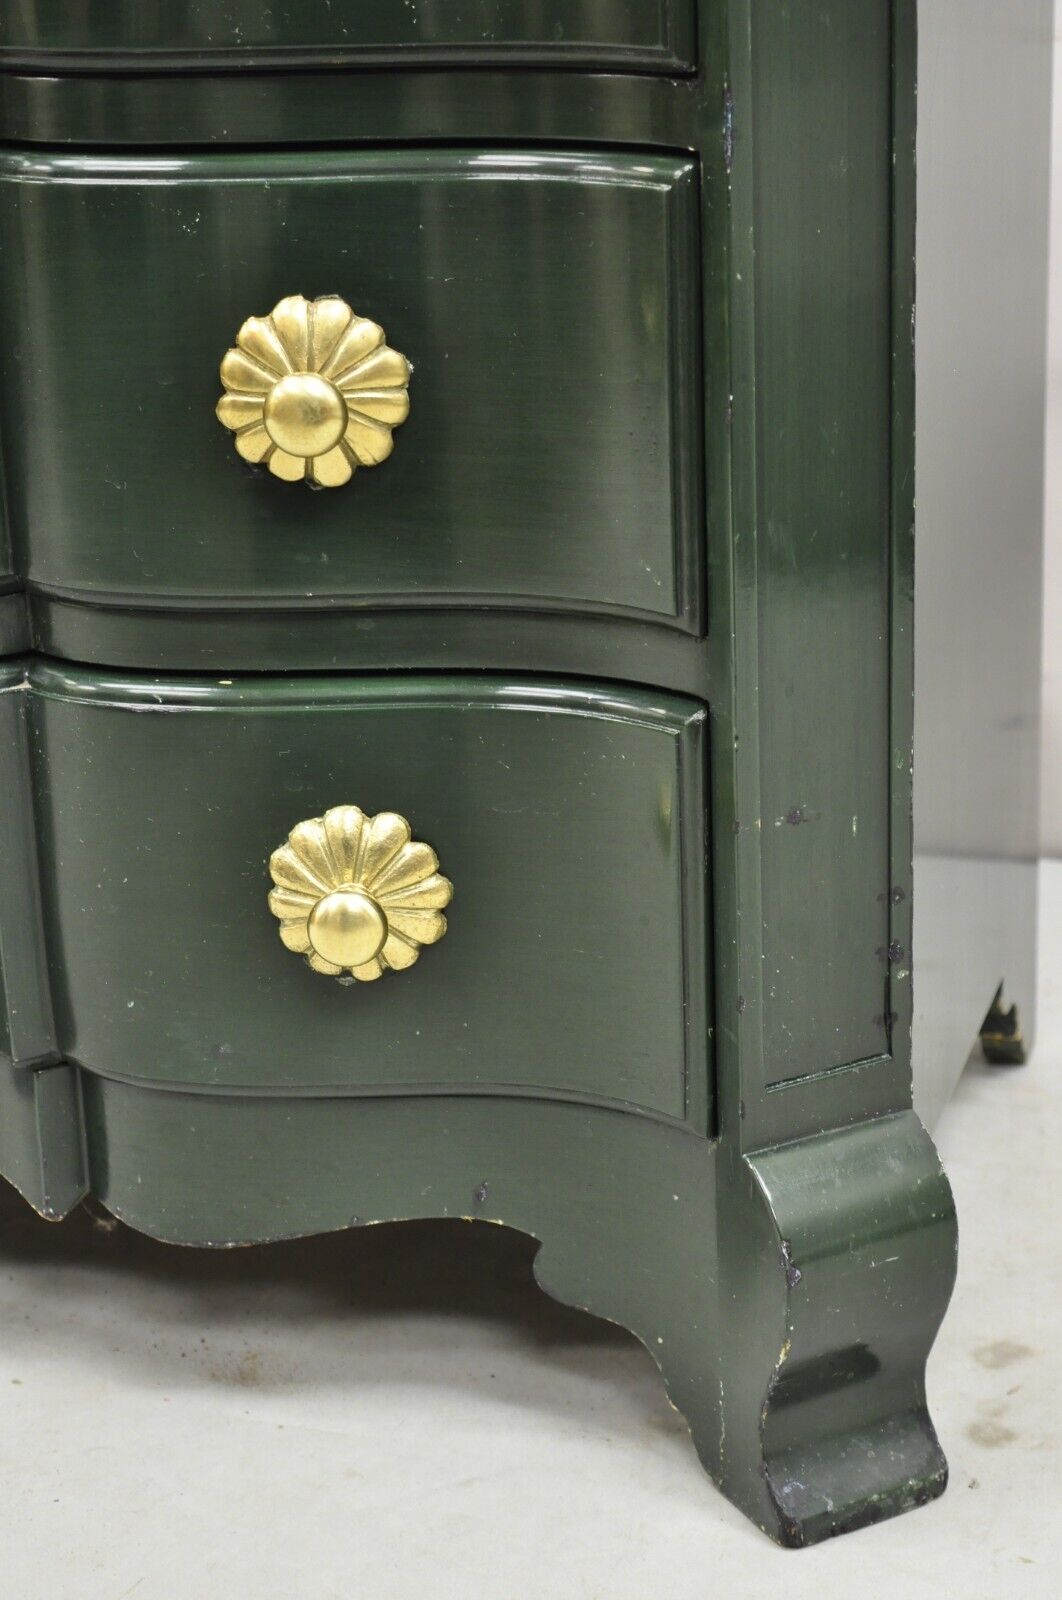 Vintage French Provincial Style Green Lacquer 3 Drawer Nightstand by Roundtree